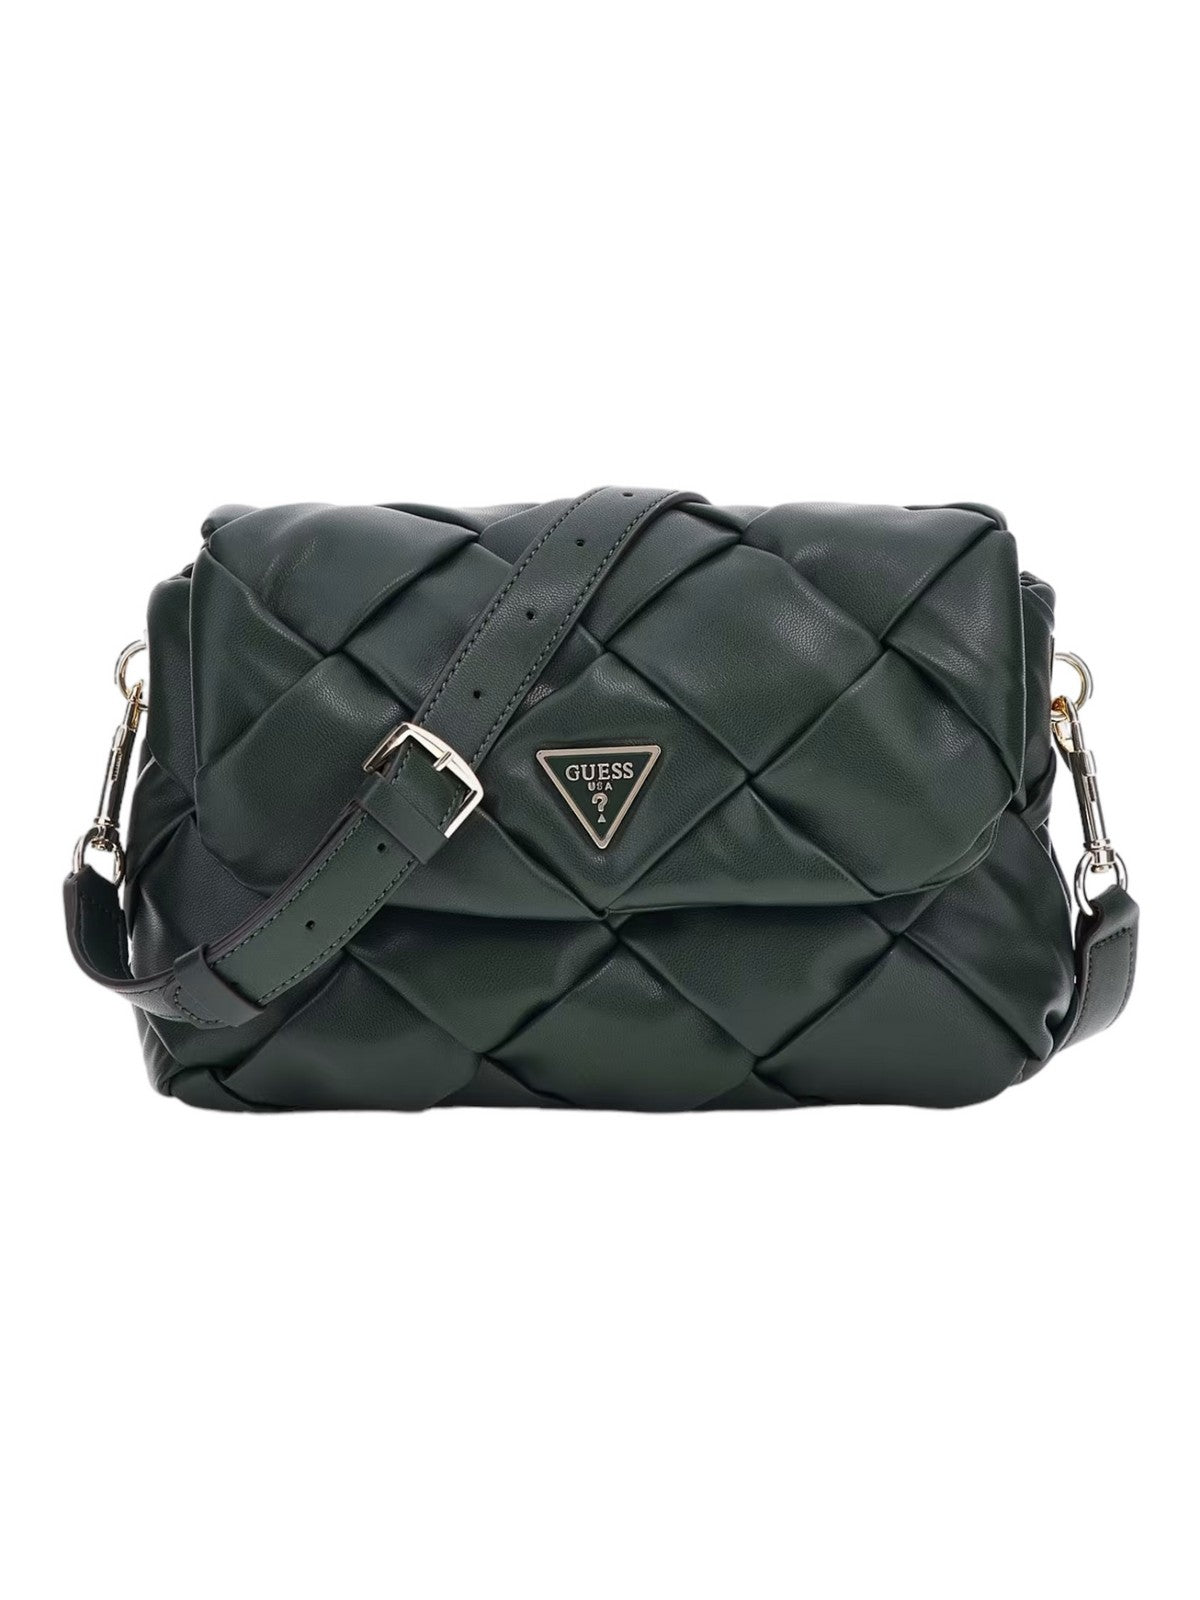 GUESS Sac pour femmes HWWG89 86190 FOR Green